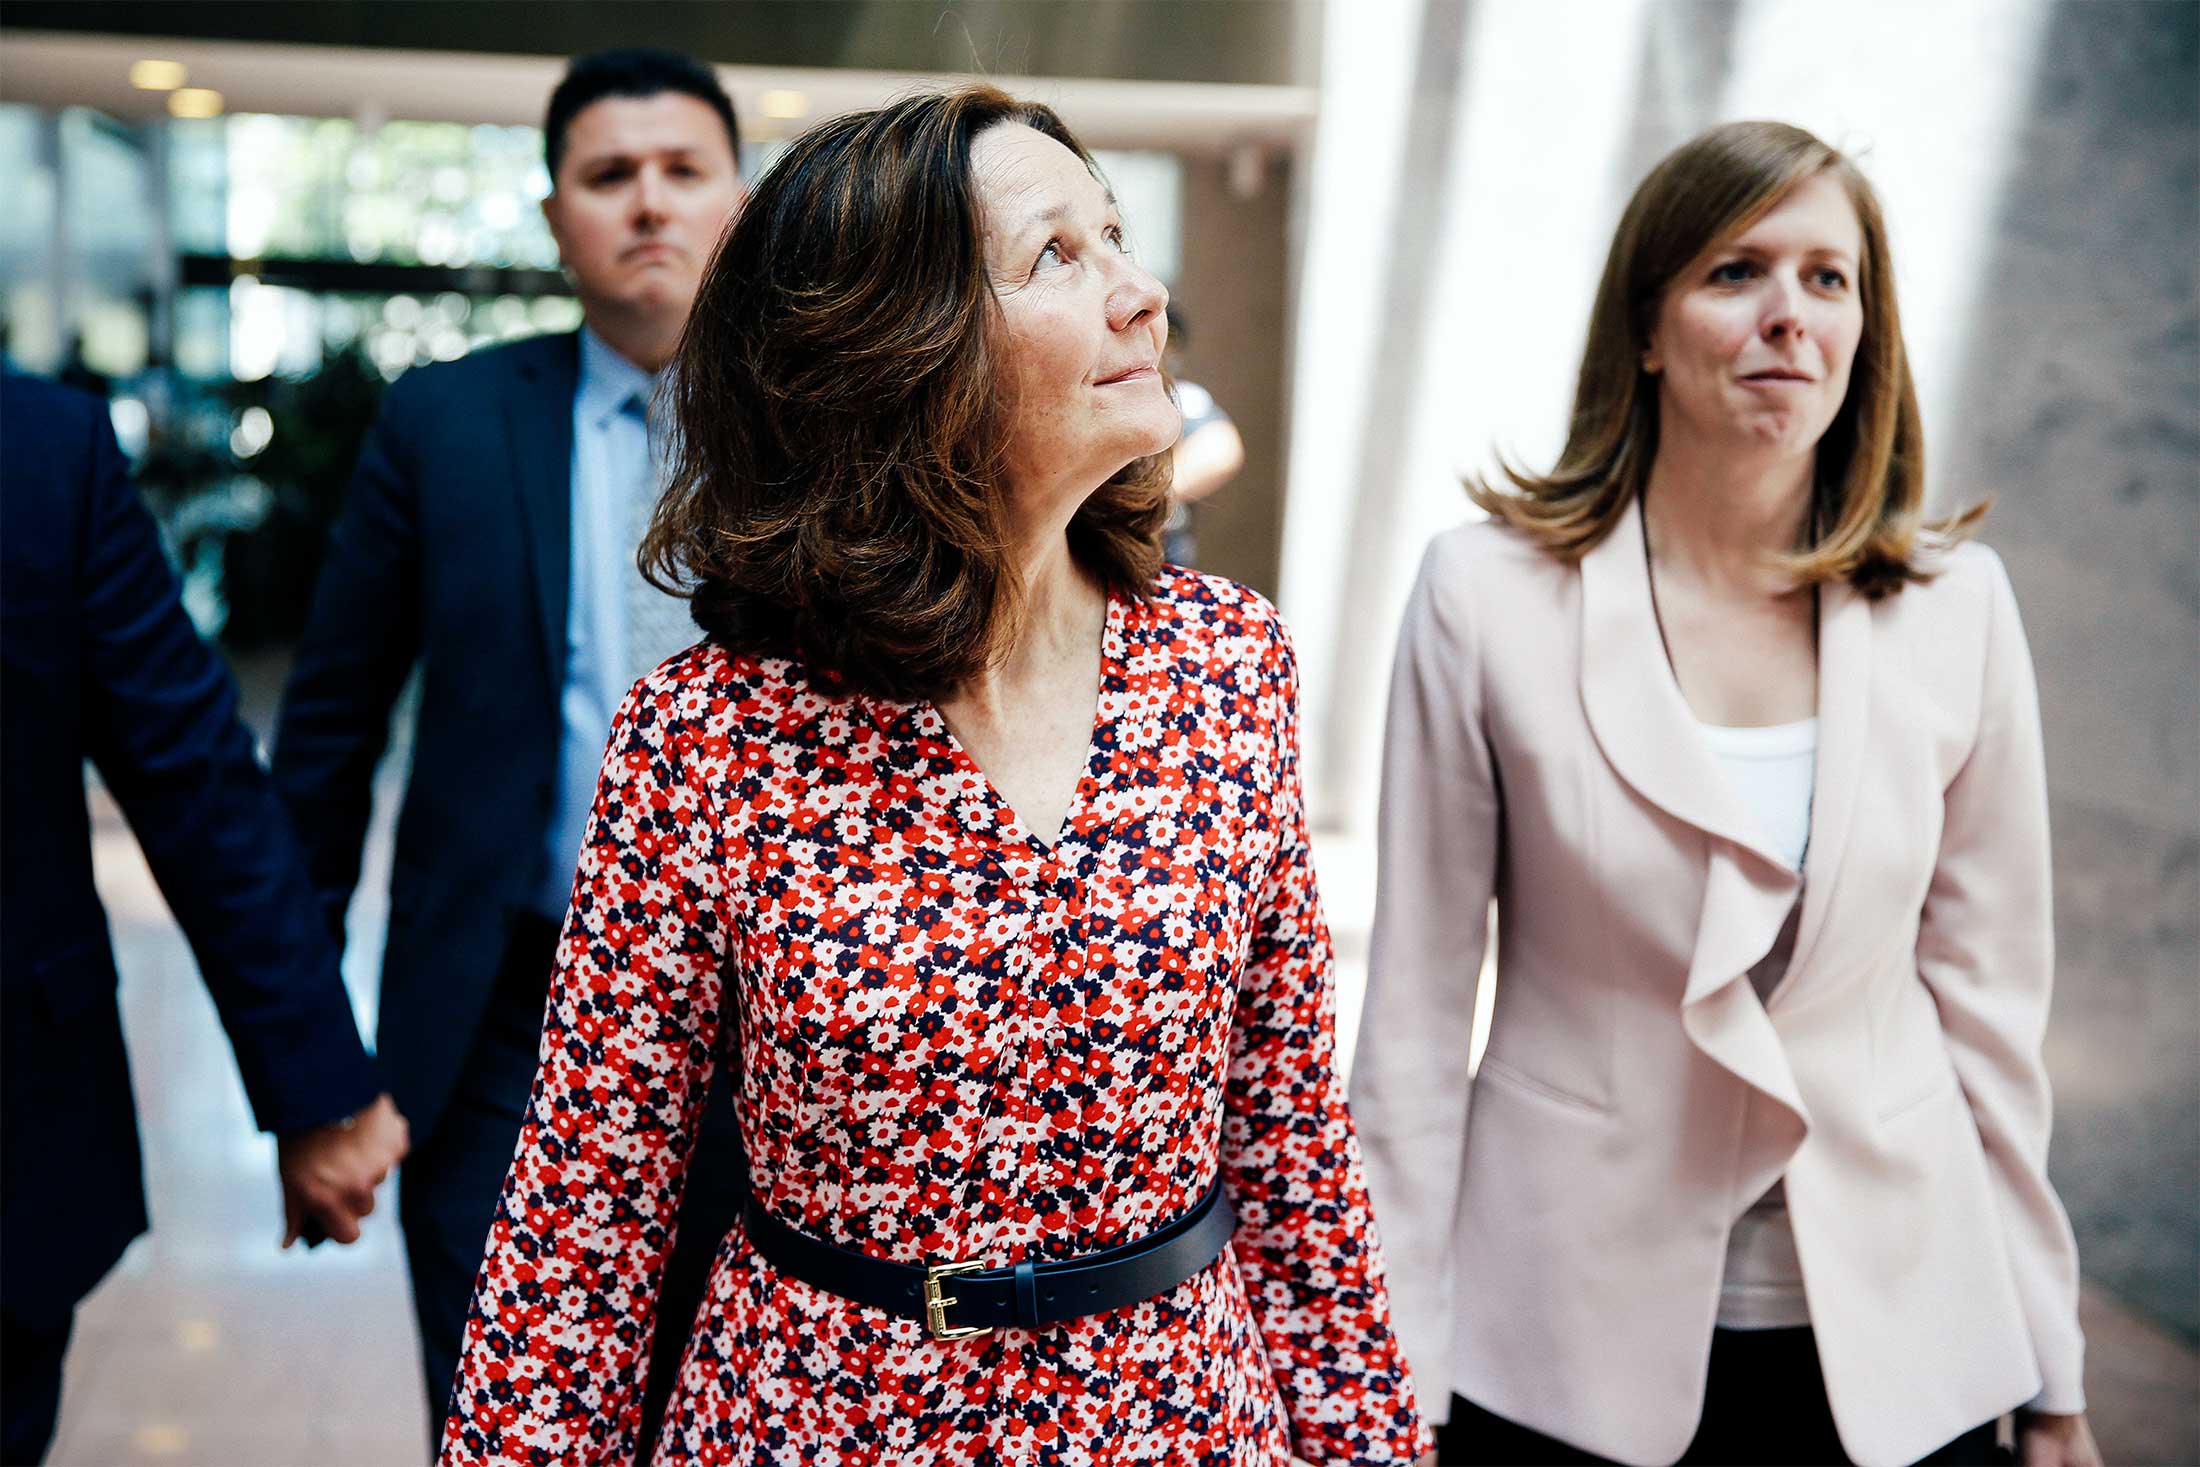 Gina Haspel walks through a Senate office building while wearing a flowery red dress.